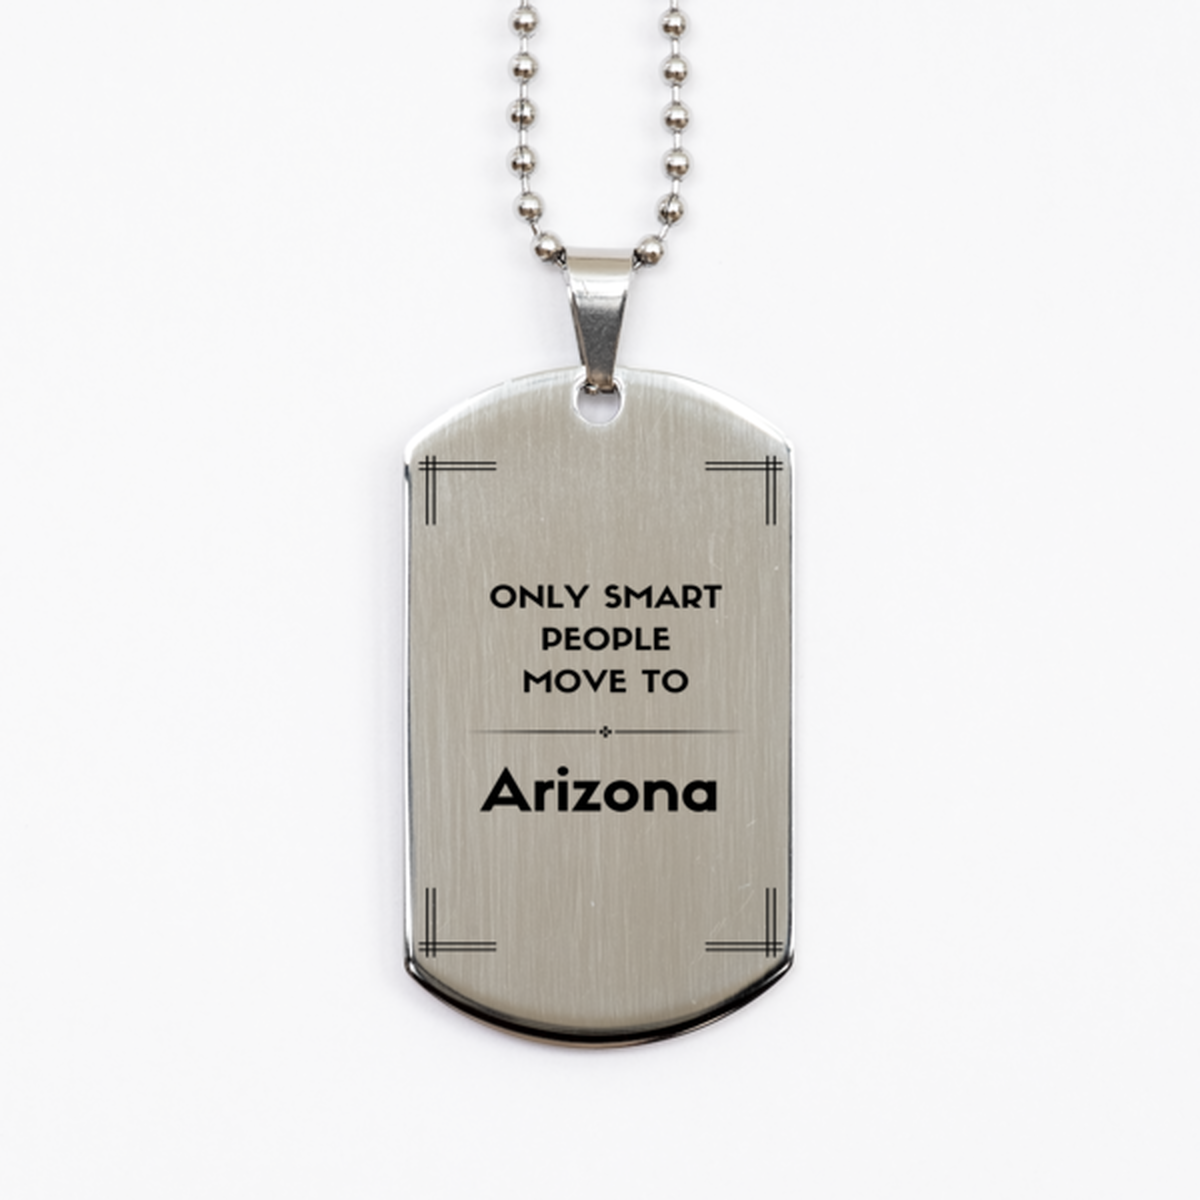 Only smart people move to Arizona Silver Dog Tag, Gag Gifts For Arizona, Move to Arizona Gifts for Friends Coworker Funny Saying Quote